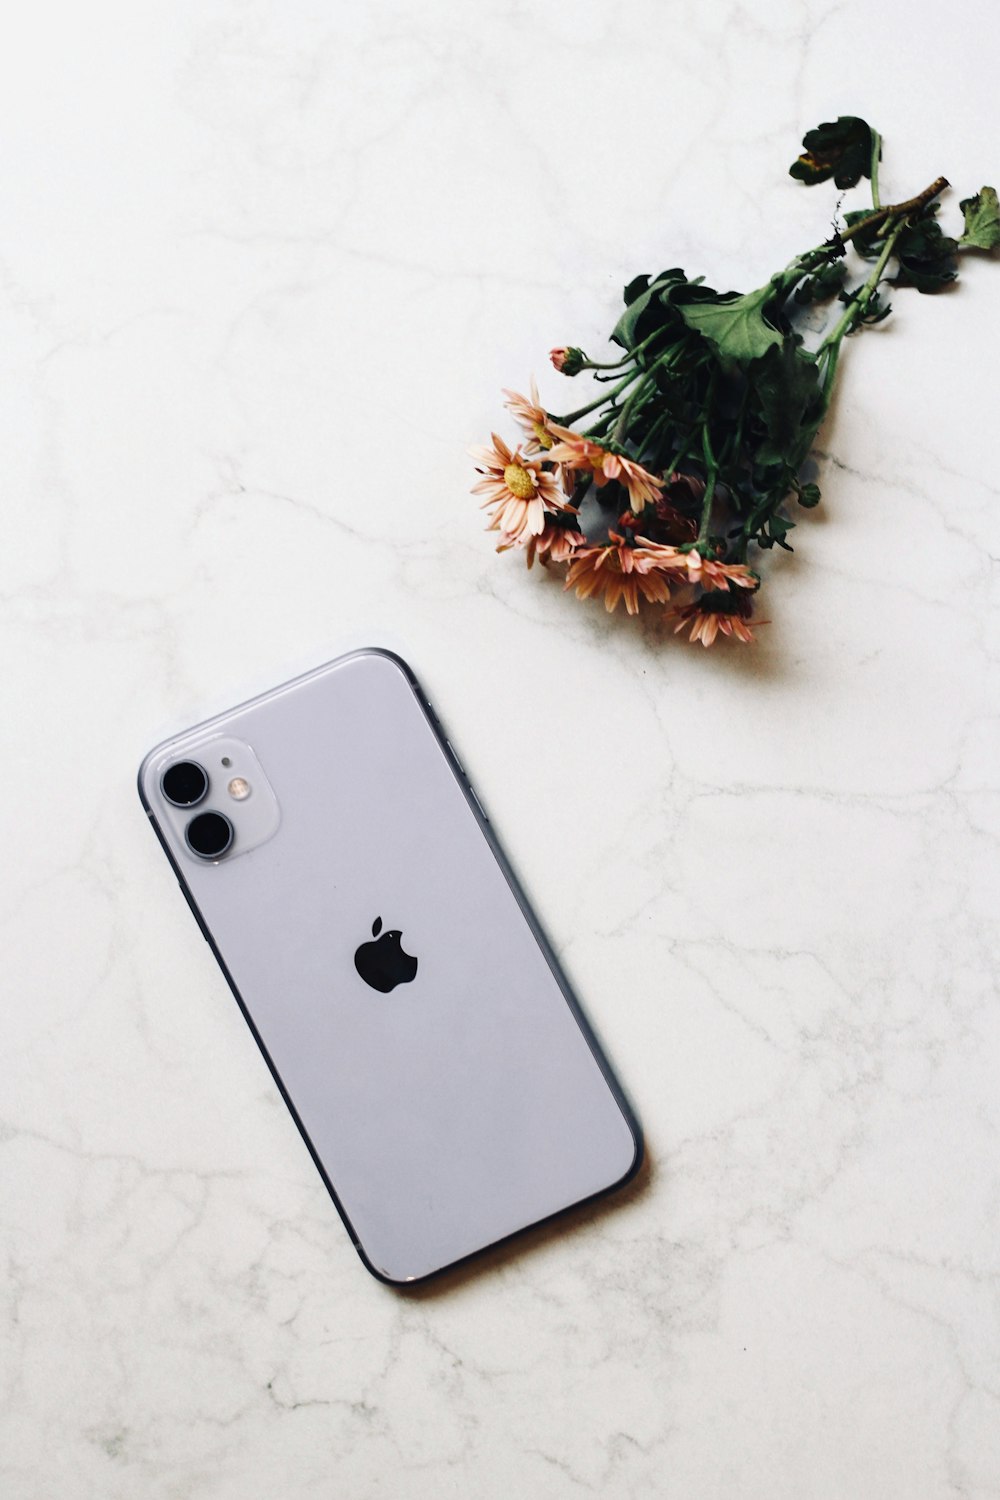 silver iphone 6 on white surface